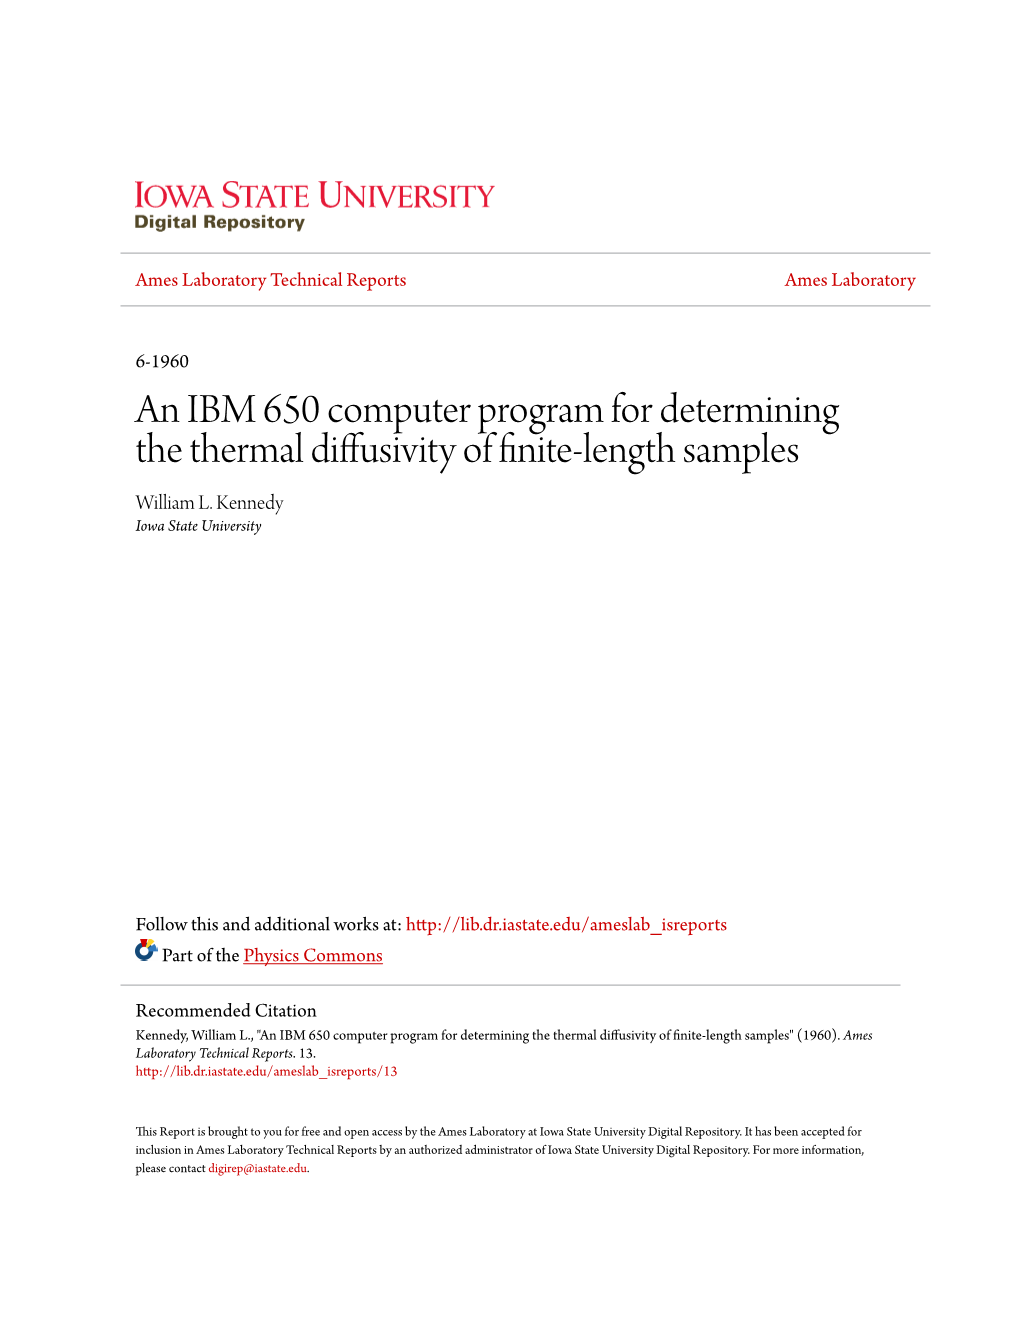 An IBM 650 Computer Program for Determining the Thermal Diffusivity of Finite-Length Samples William L